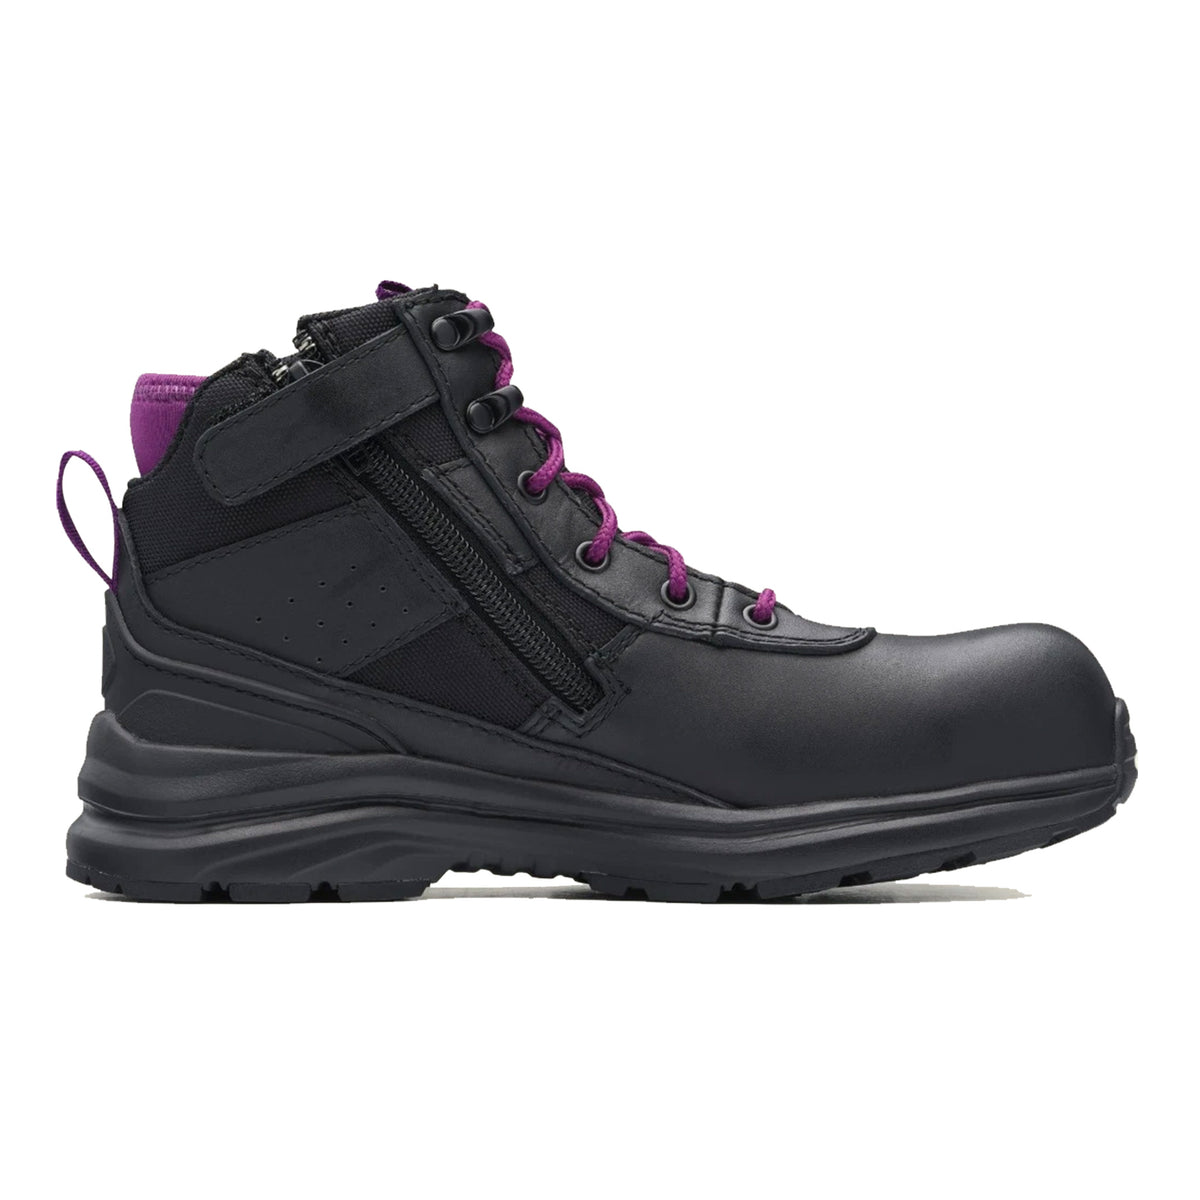 blundstone womens safety jogger in black purple